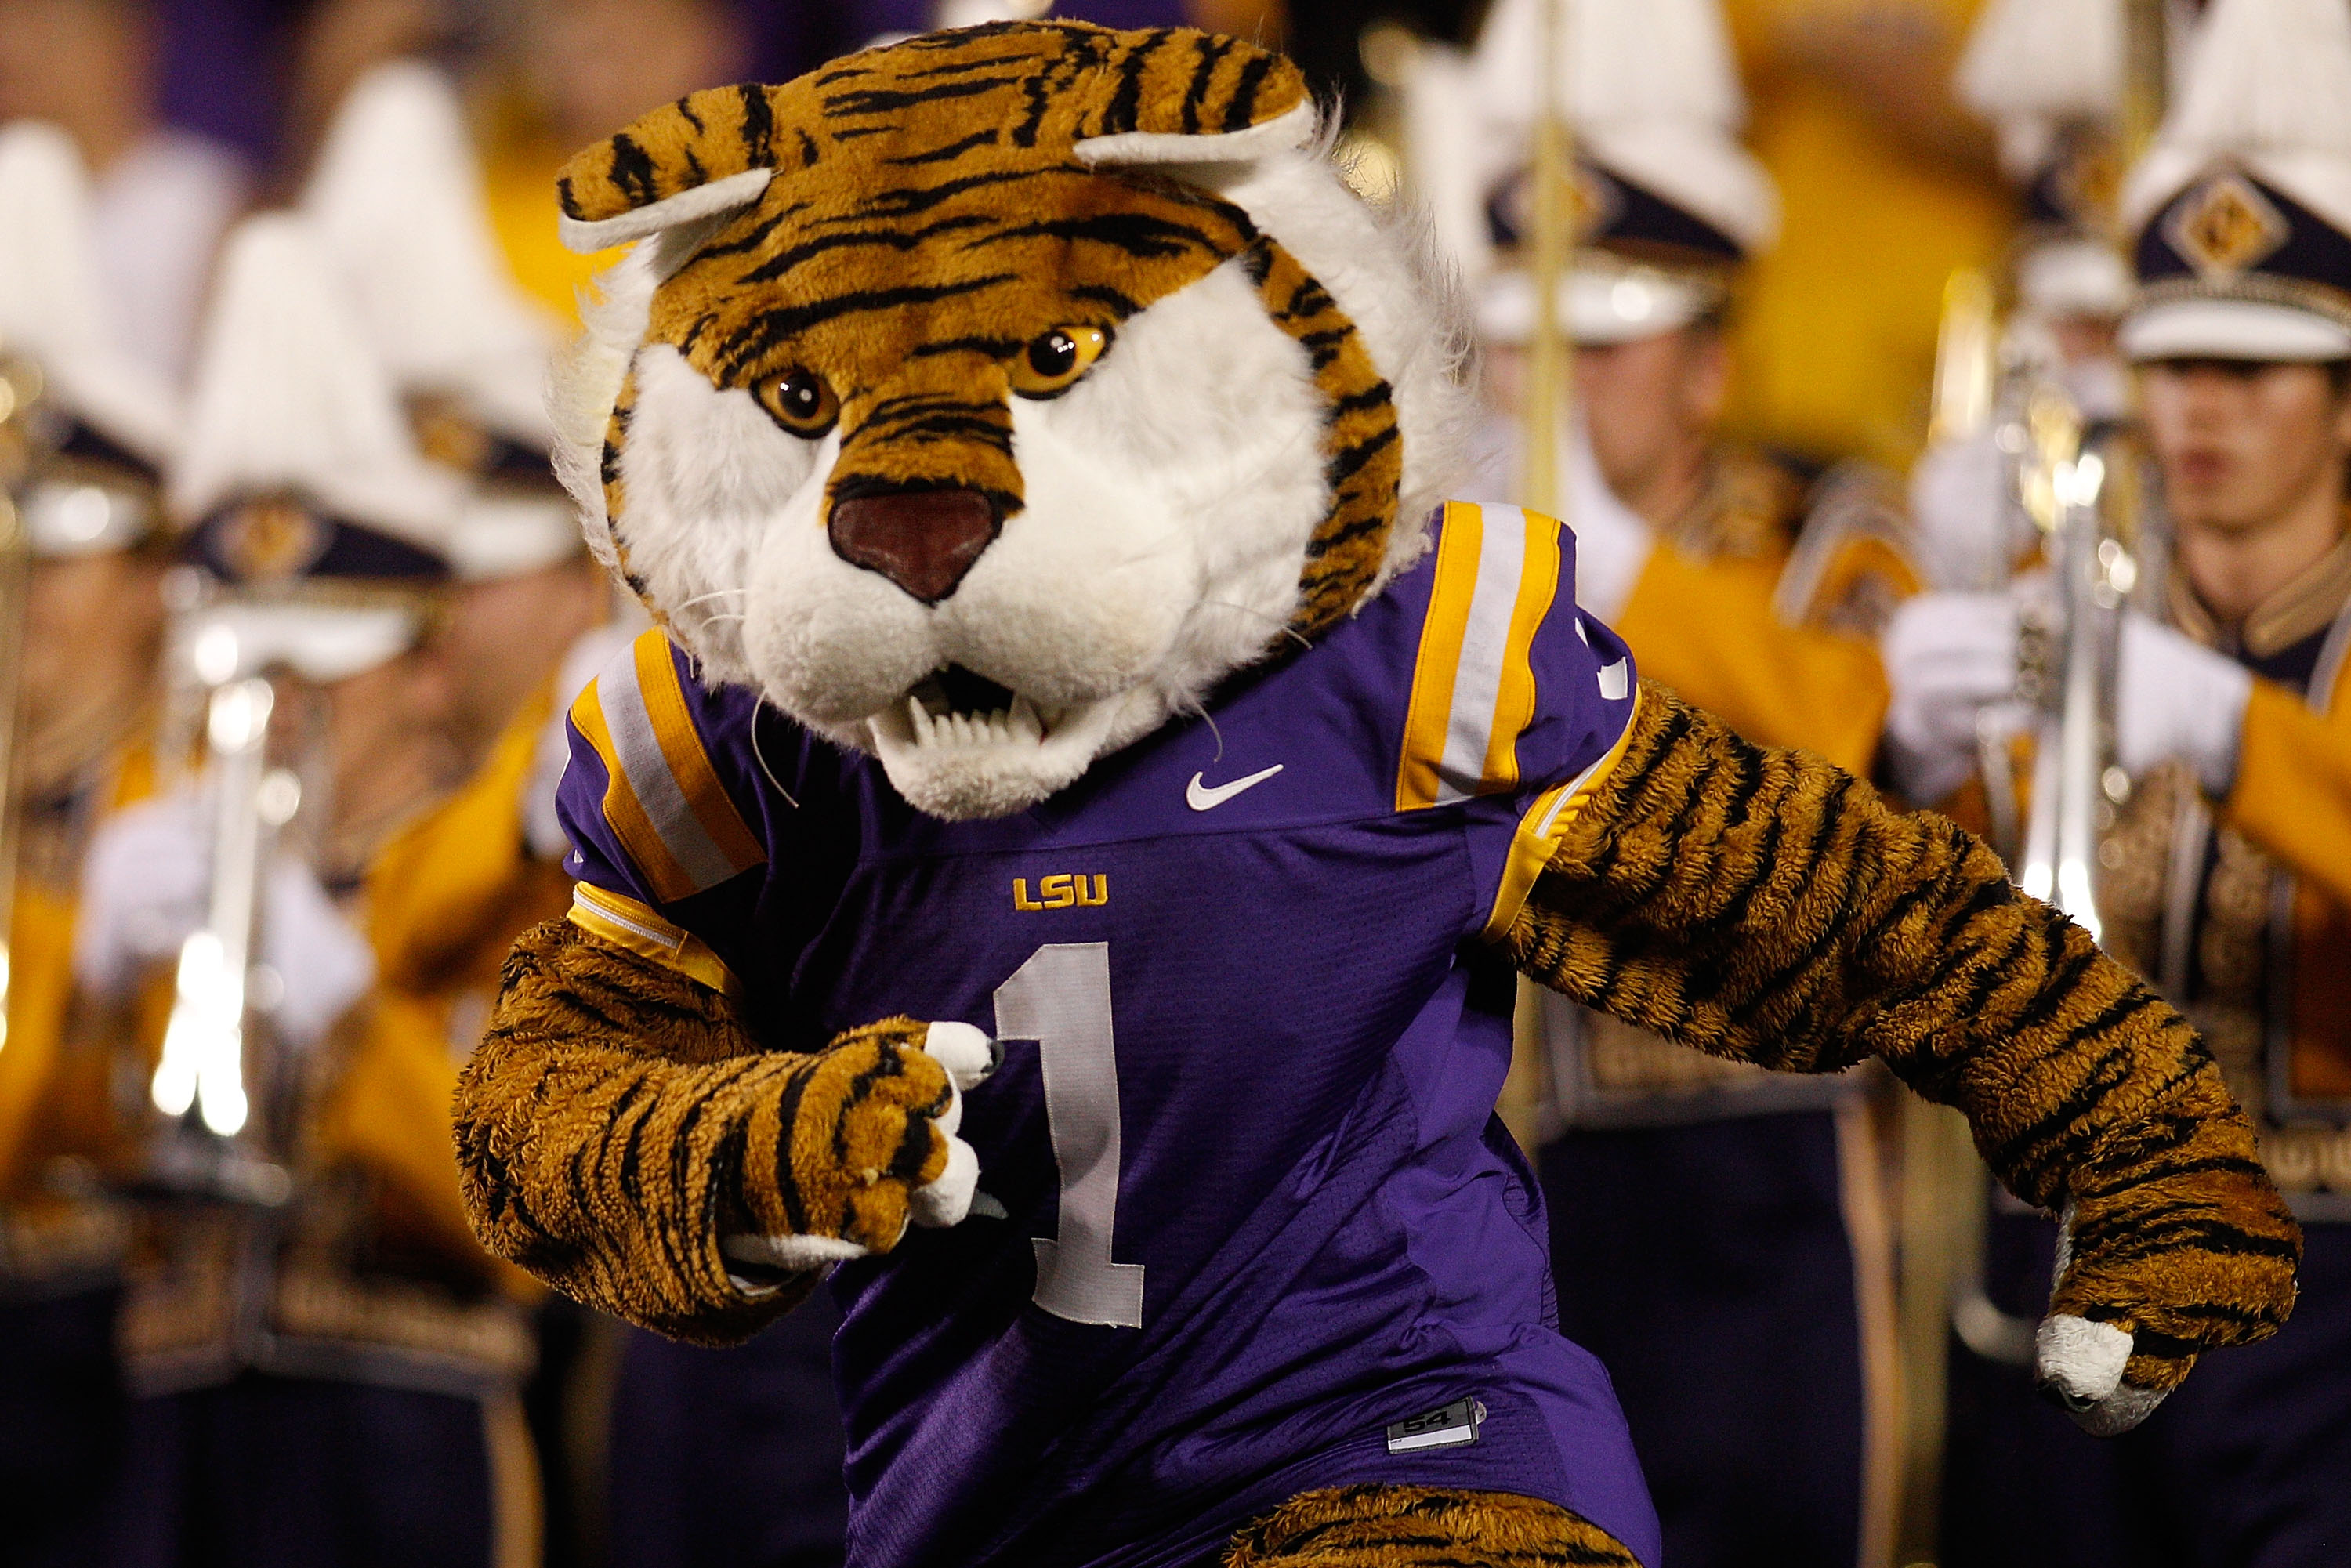 BATON ROUGE, LA - SEPTEMBER 25:  Mascot Mike the Tiger of the Louisiana State Univeristy Tigers marches on the field before the game against the West Virginia Mountaineers at Tiger Stadium on September 25, 2010 in Baton Rouge, Louisiana.  (Photo by Chris